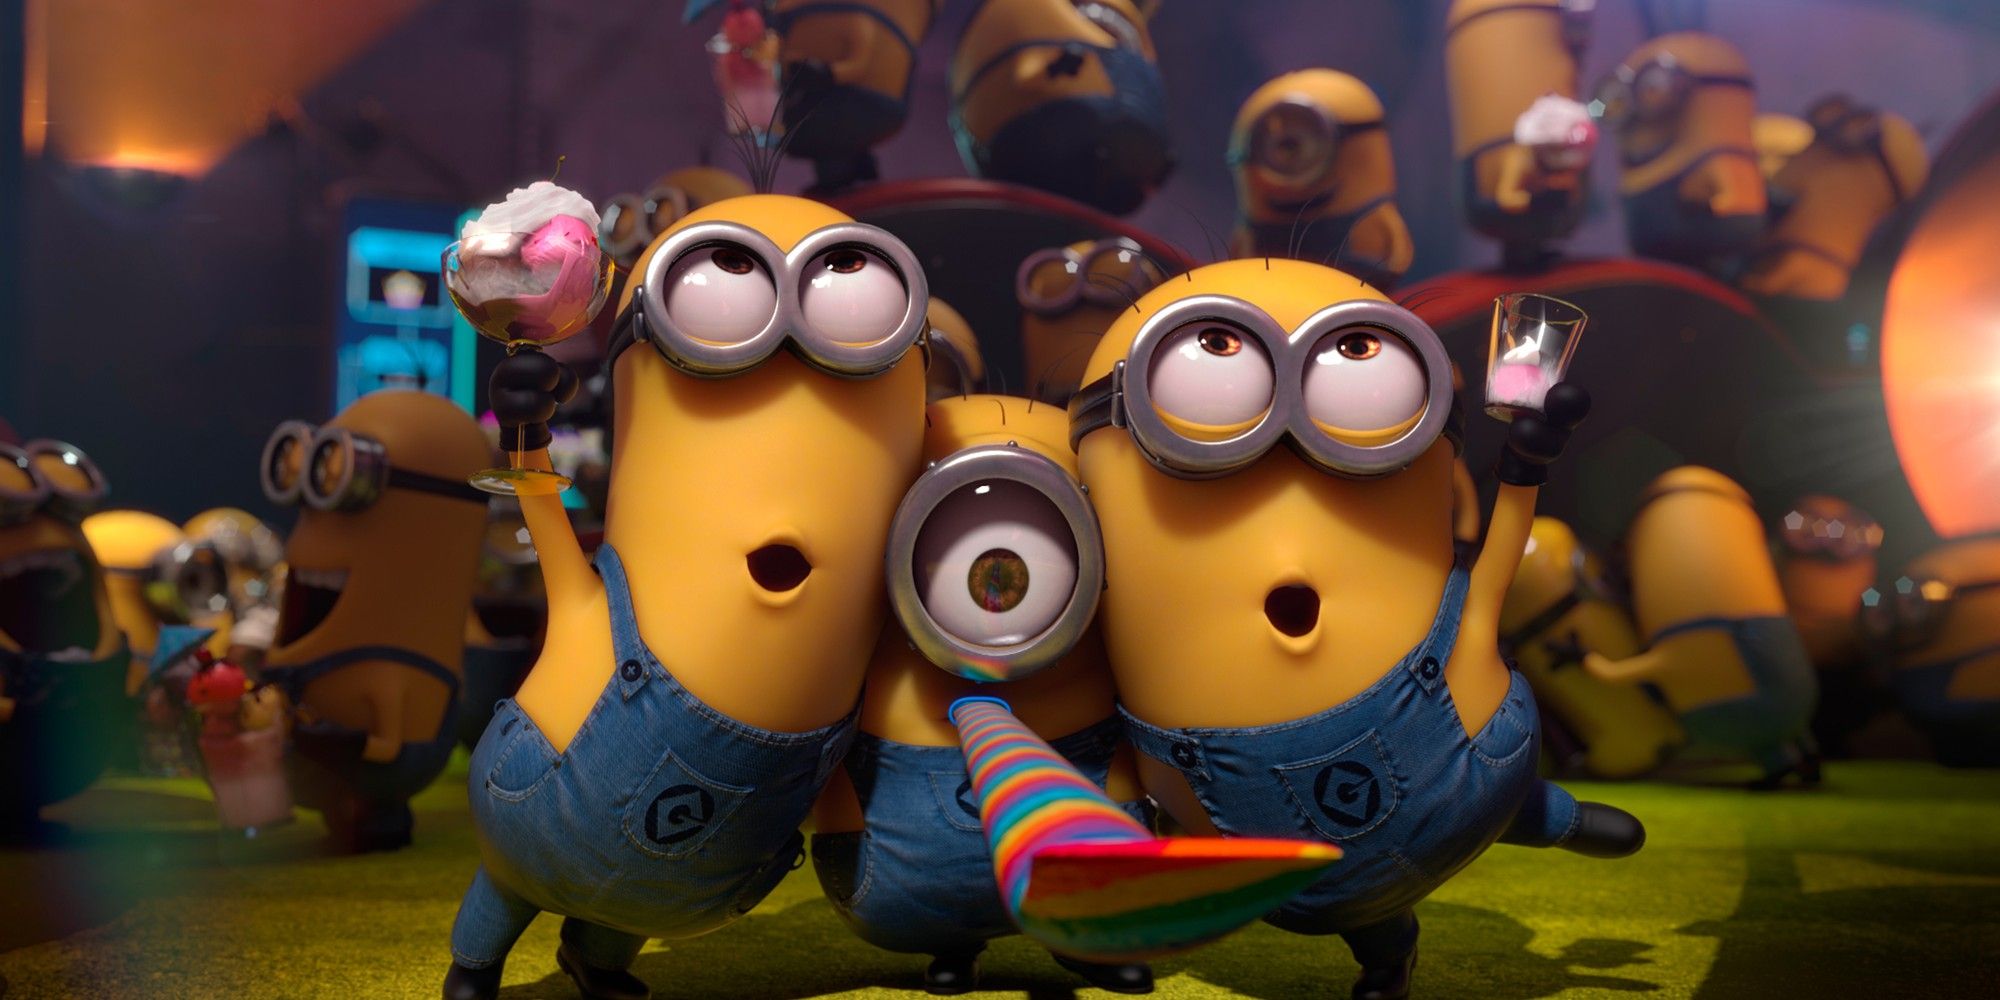 the Minions celebrating in Despicable Me 2